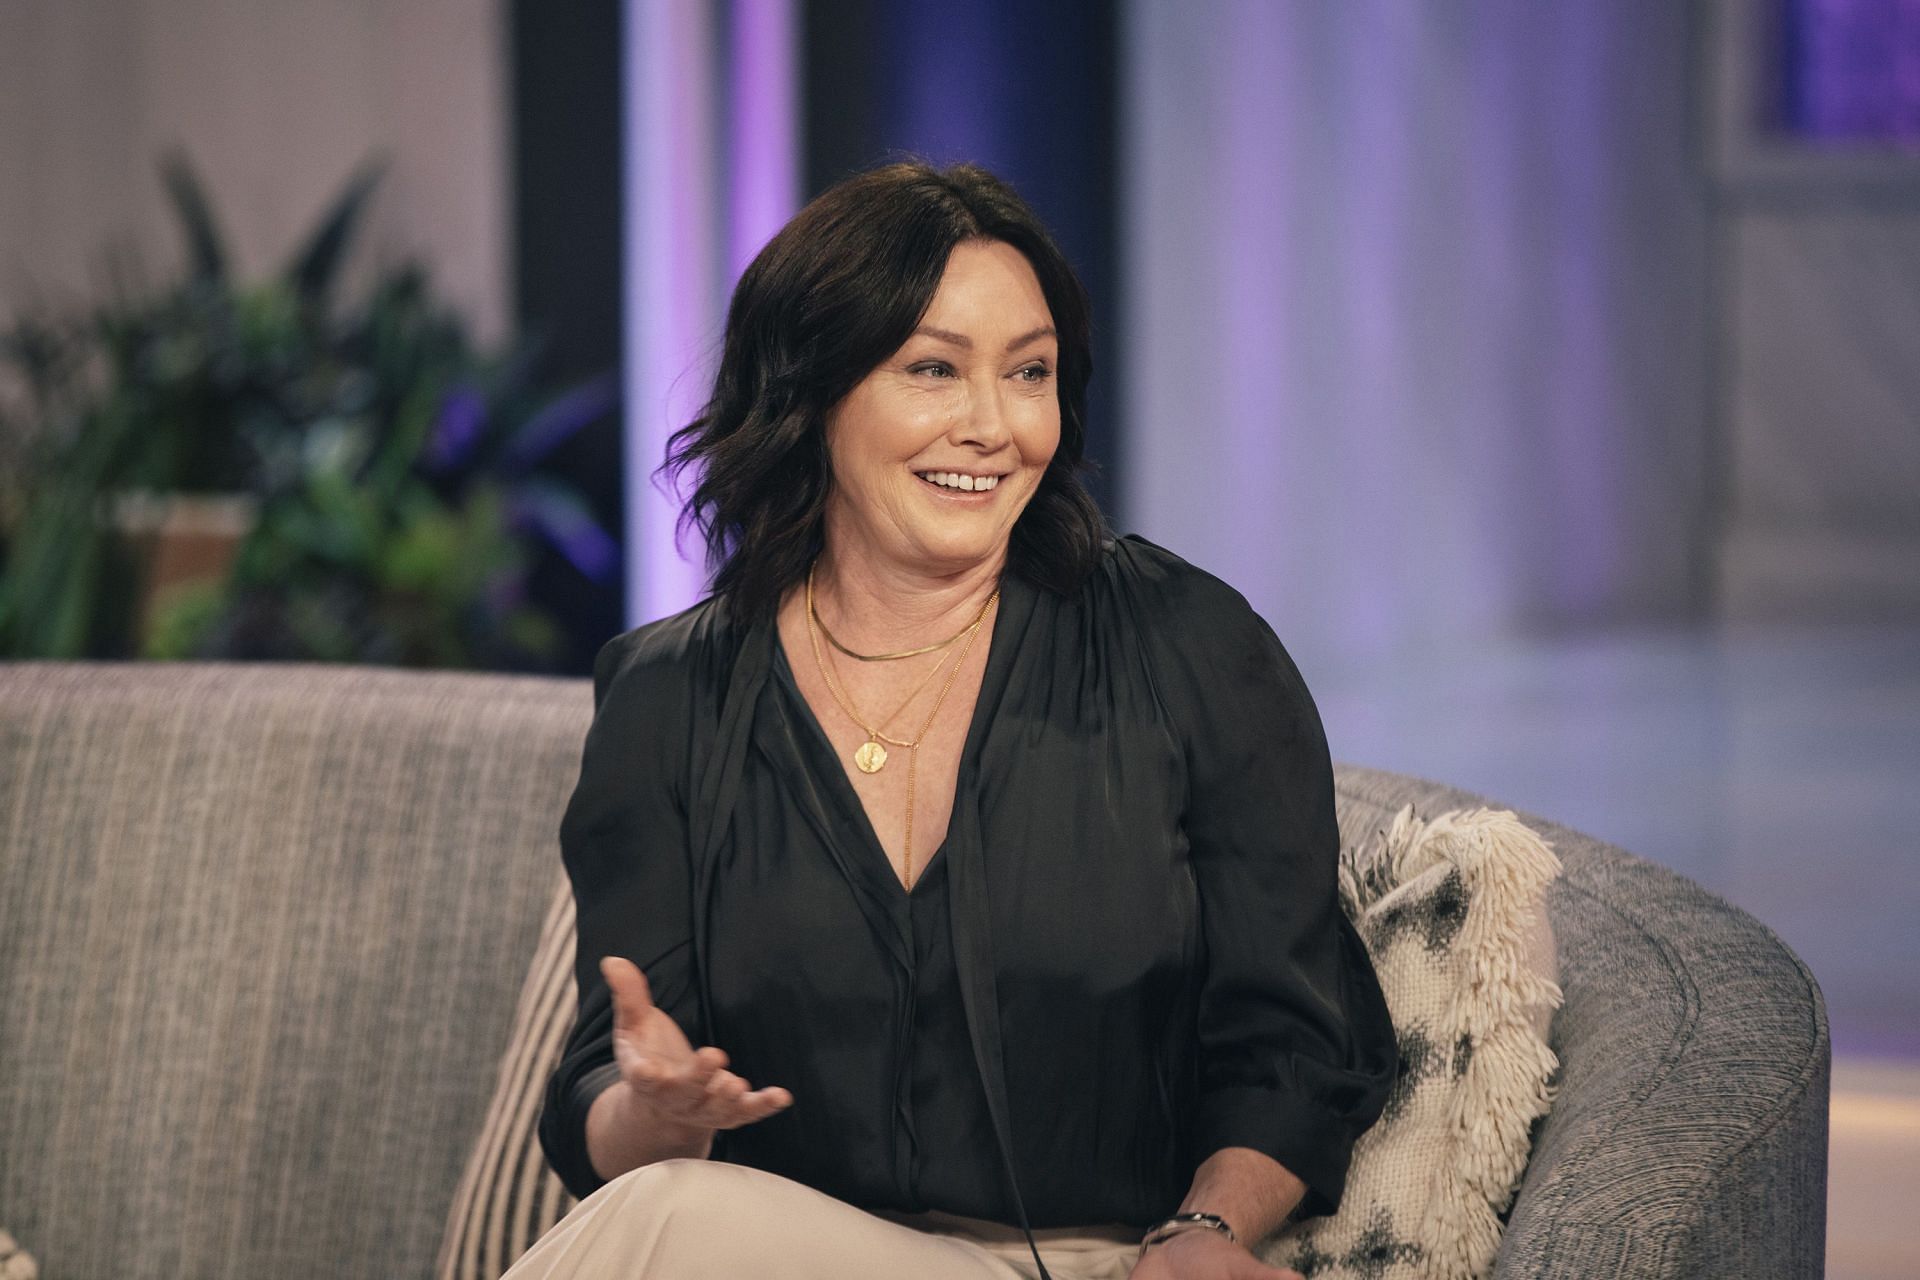 Shannen Doherty, a well-known actress and producer who gained popularity in the 1990s (Getty images)